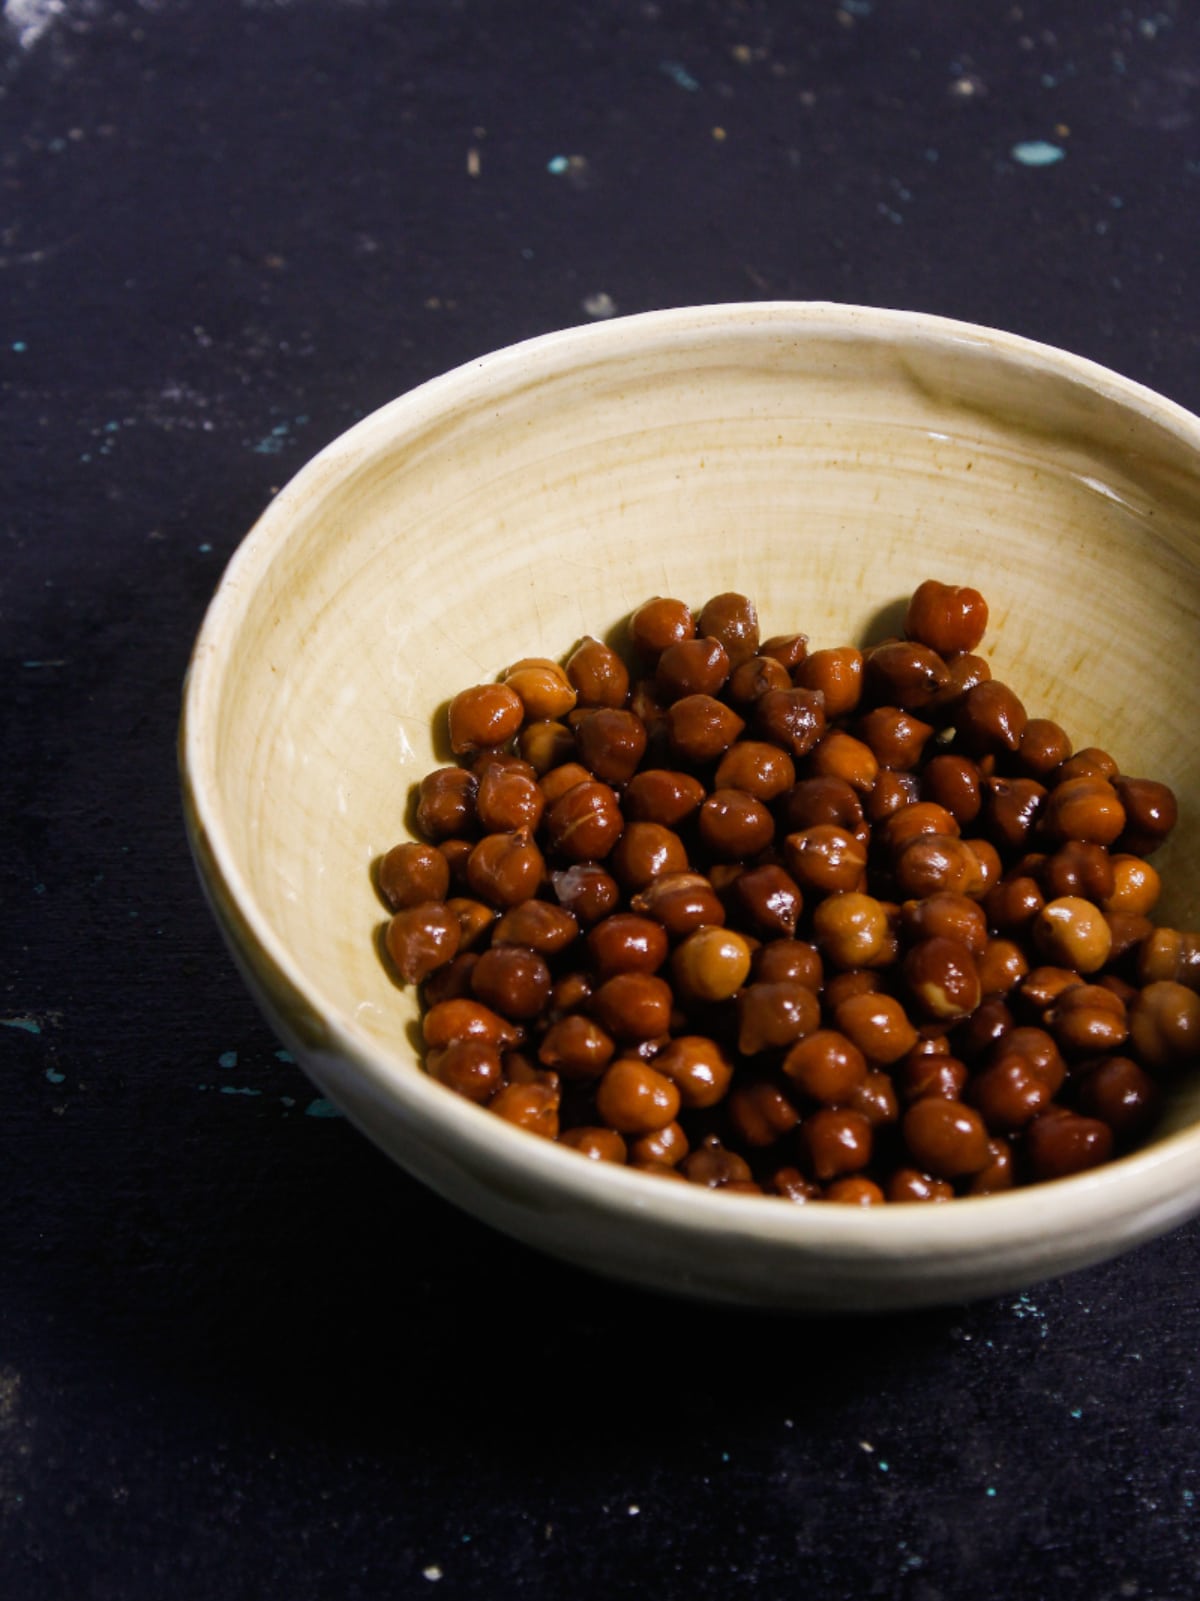 Boiled chickpeas in a bowl